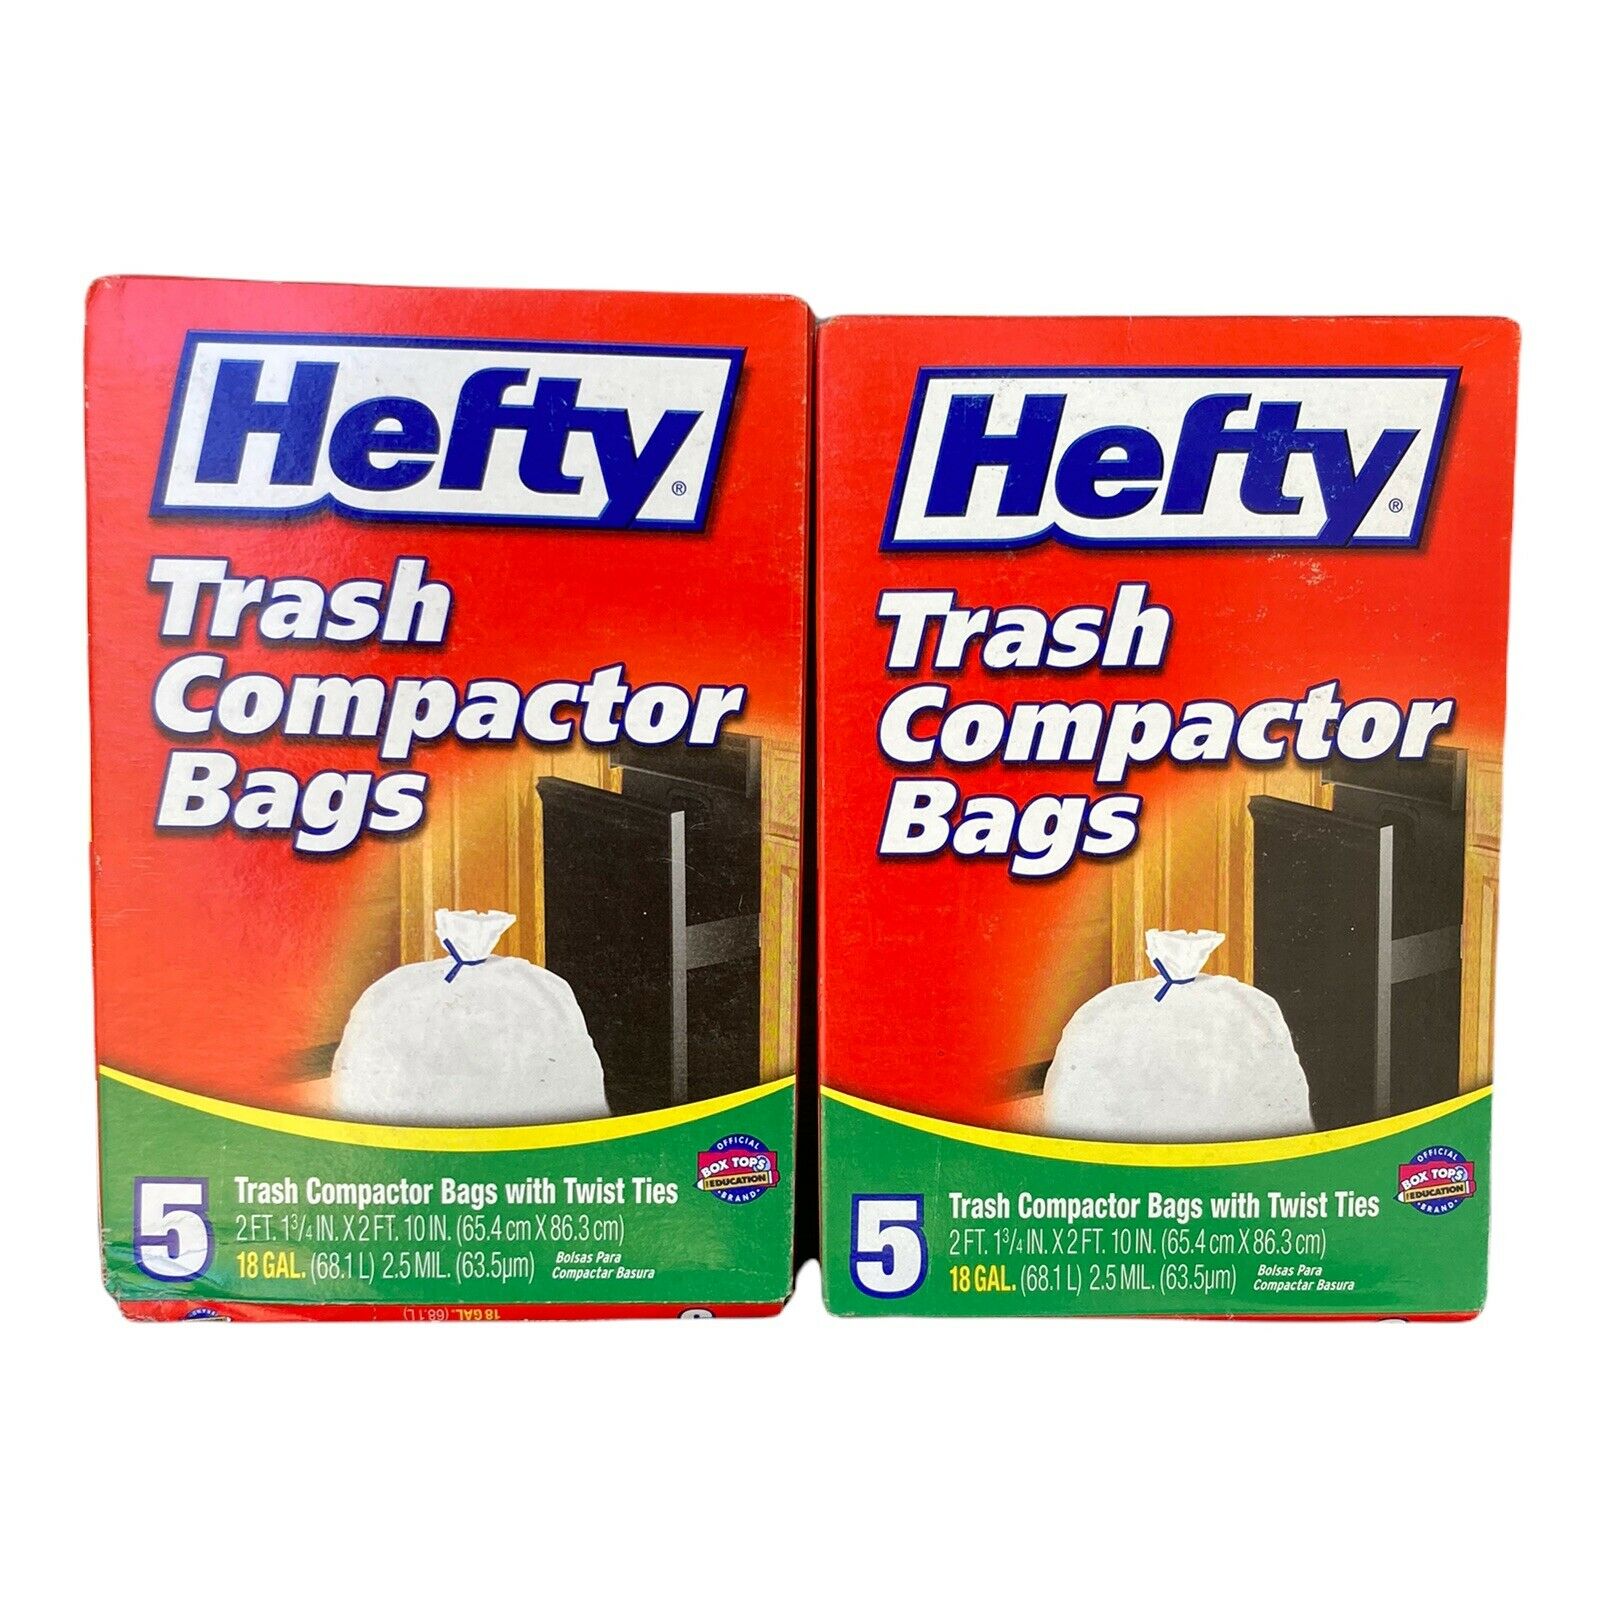 Hefty 5 Count Trash Compactor Twist Tie Bags 18 Gallon Lot Of 2 Boxes Free Ship